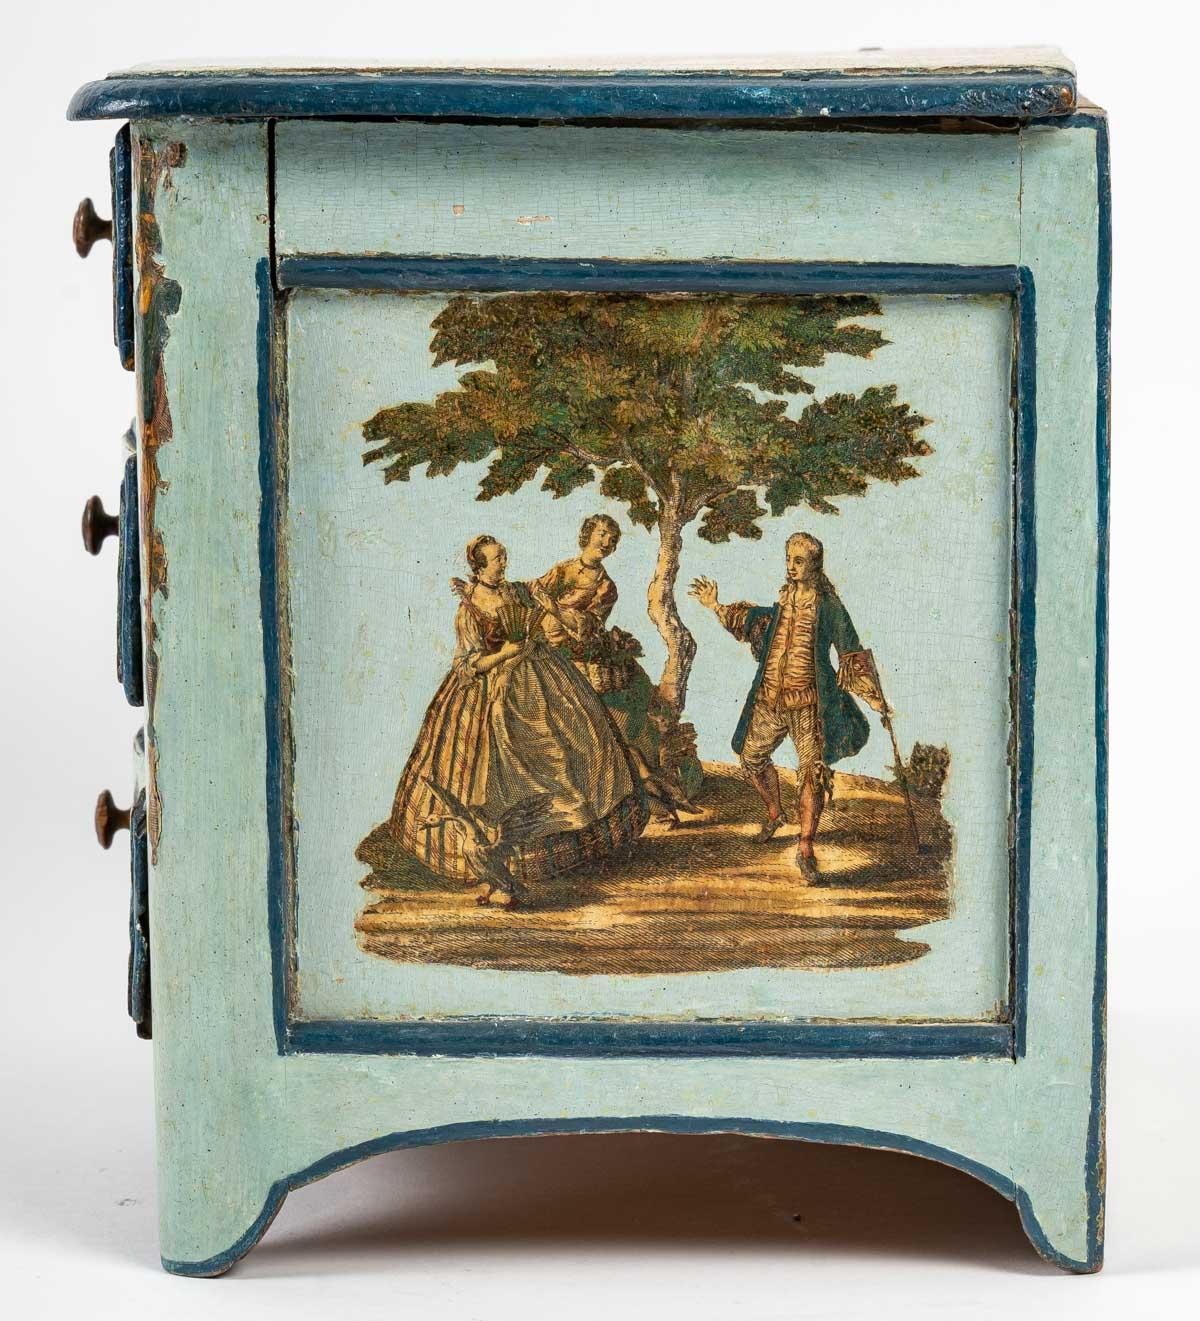 Chest of drawers from the end of the 18th century.
Beautiful chest of drawers in light blue with gallant scenes, 3 drawers, late 18th century.
Measures: H: 23 cm, W: 30 cm, D: 20cm
ref 3247.